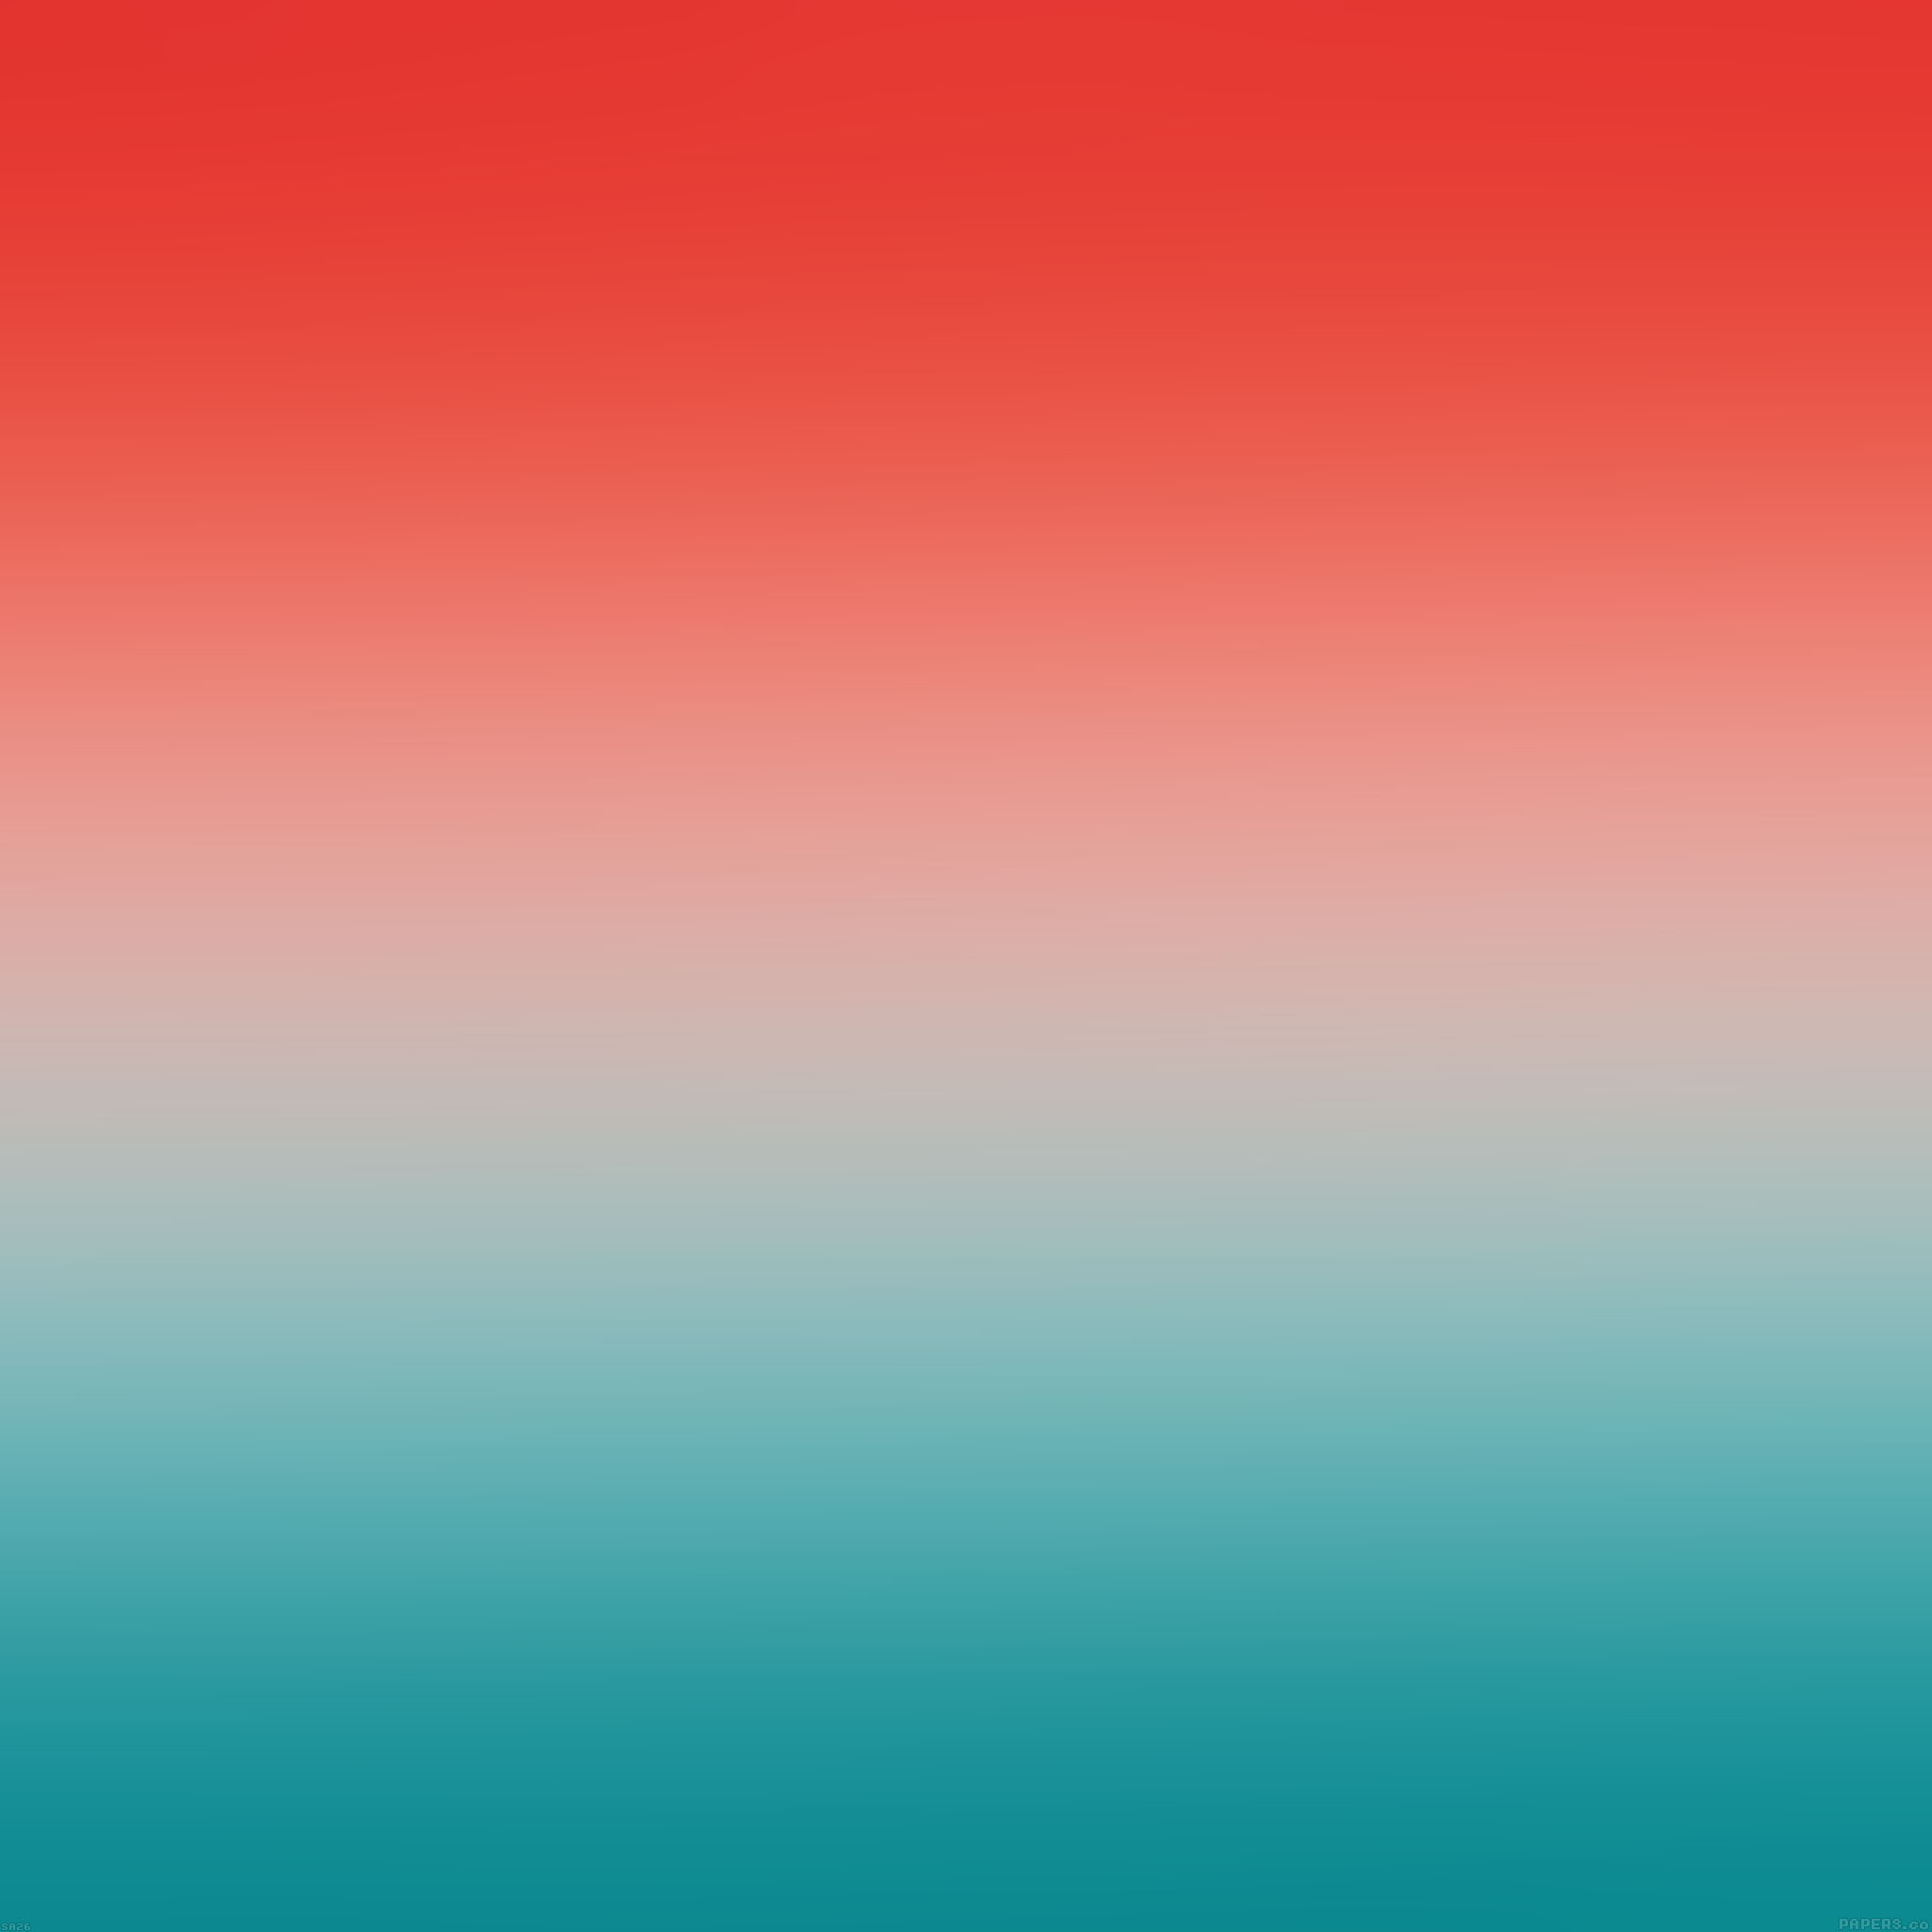 Ipad Retina - Red And Blue Iphone , HD Wallpaper & Backgrounds